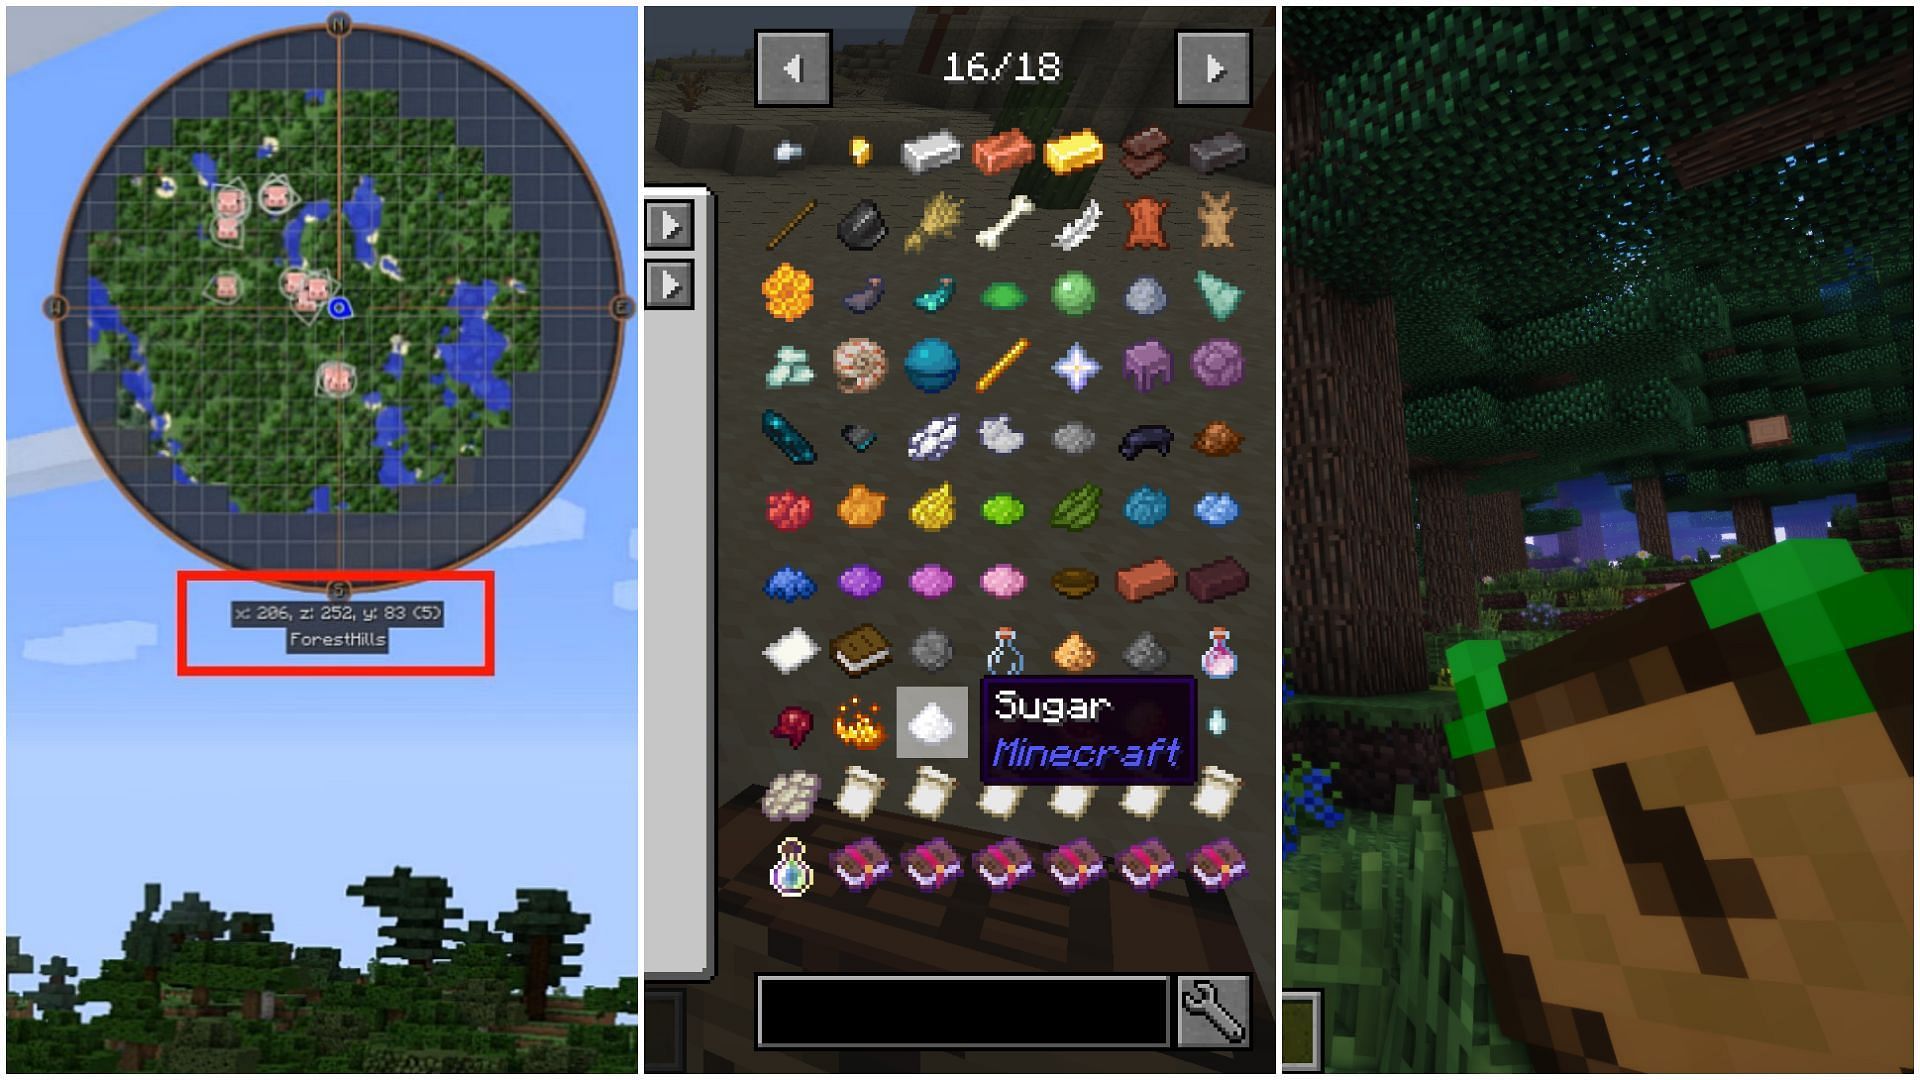 Minecraft mods: the 20 best mods to transform your game - Video